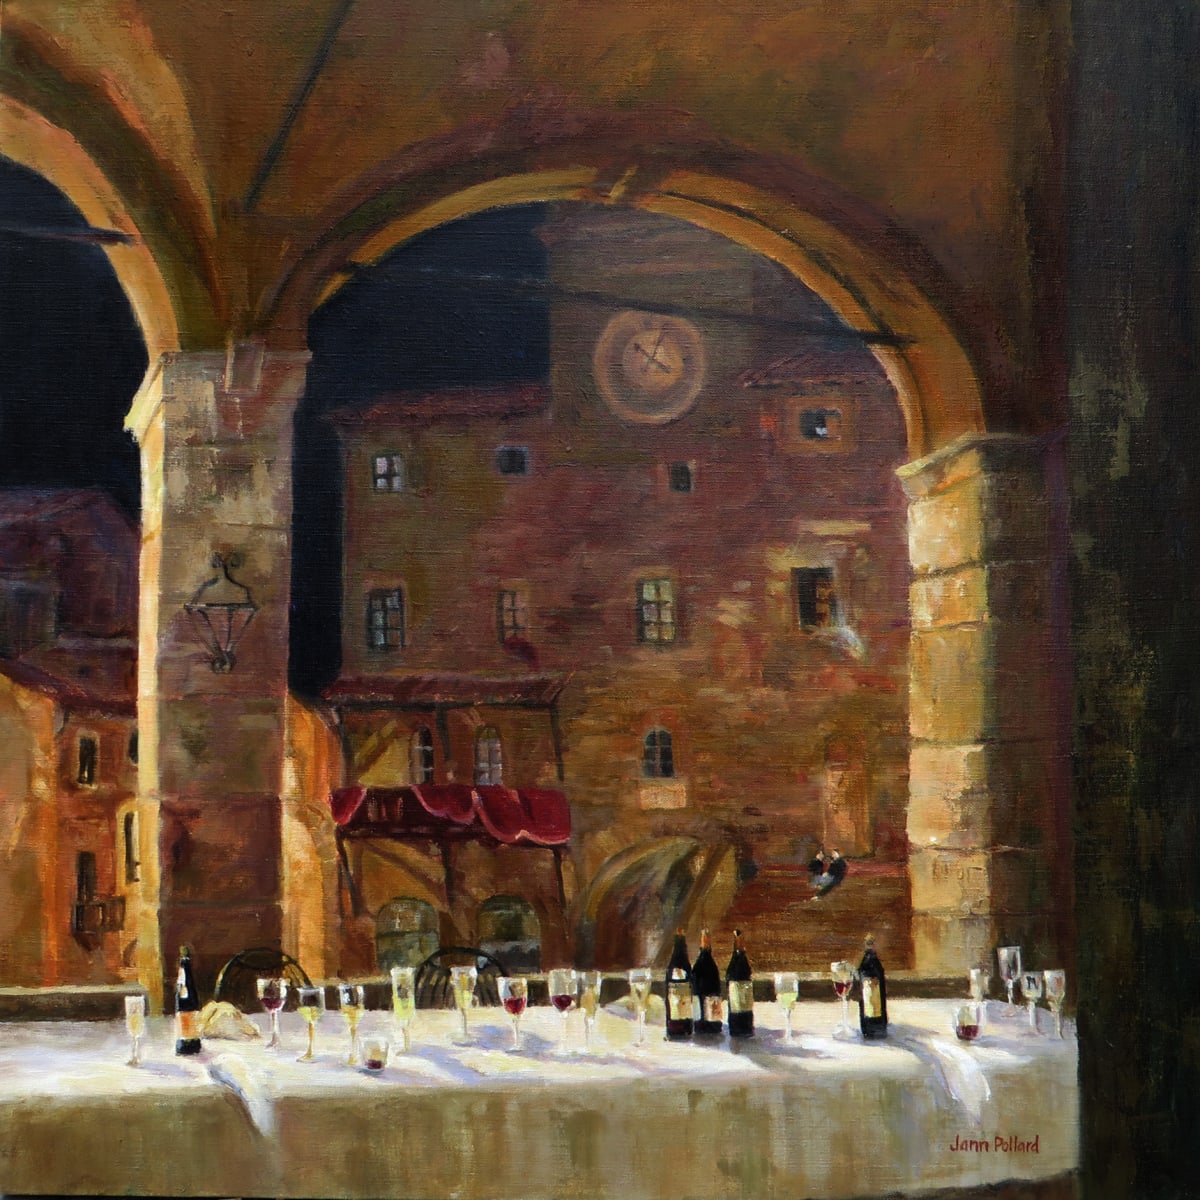 ‘Wine to Table’ - Cortona, Tuscany by Jann Lawrence Pollard  Image: "It was a great evening."